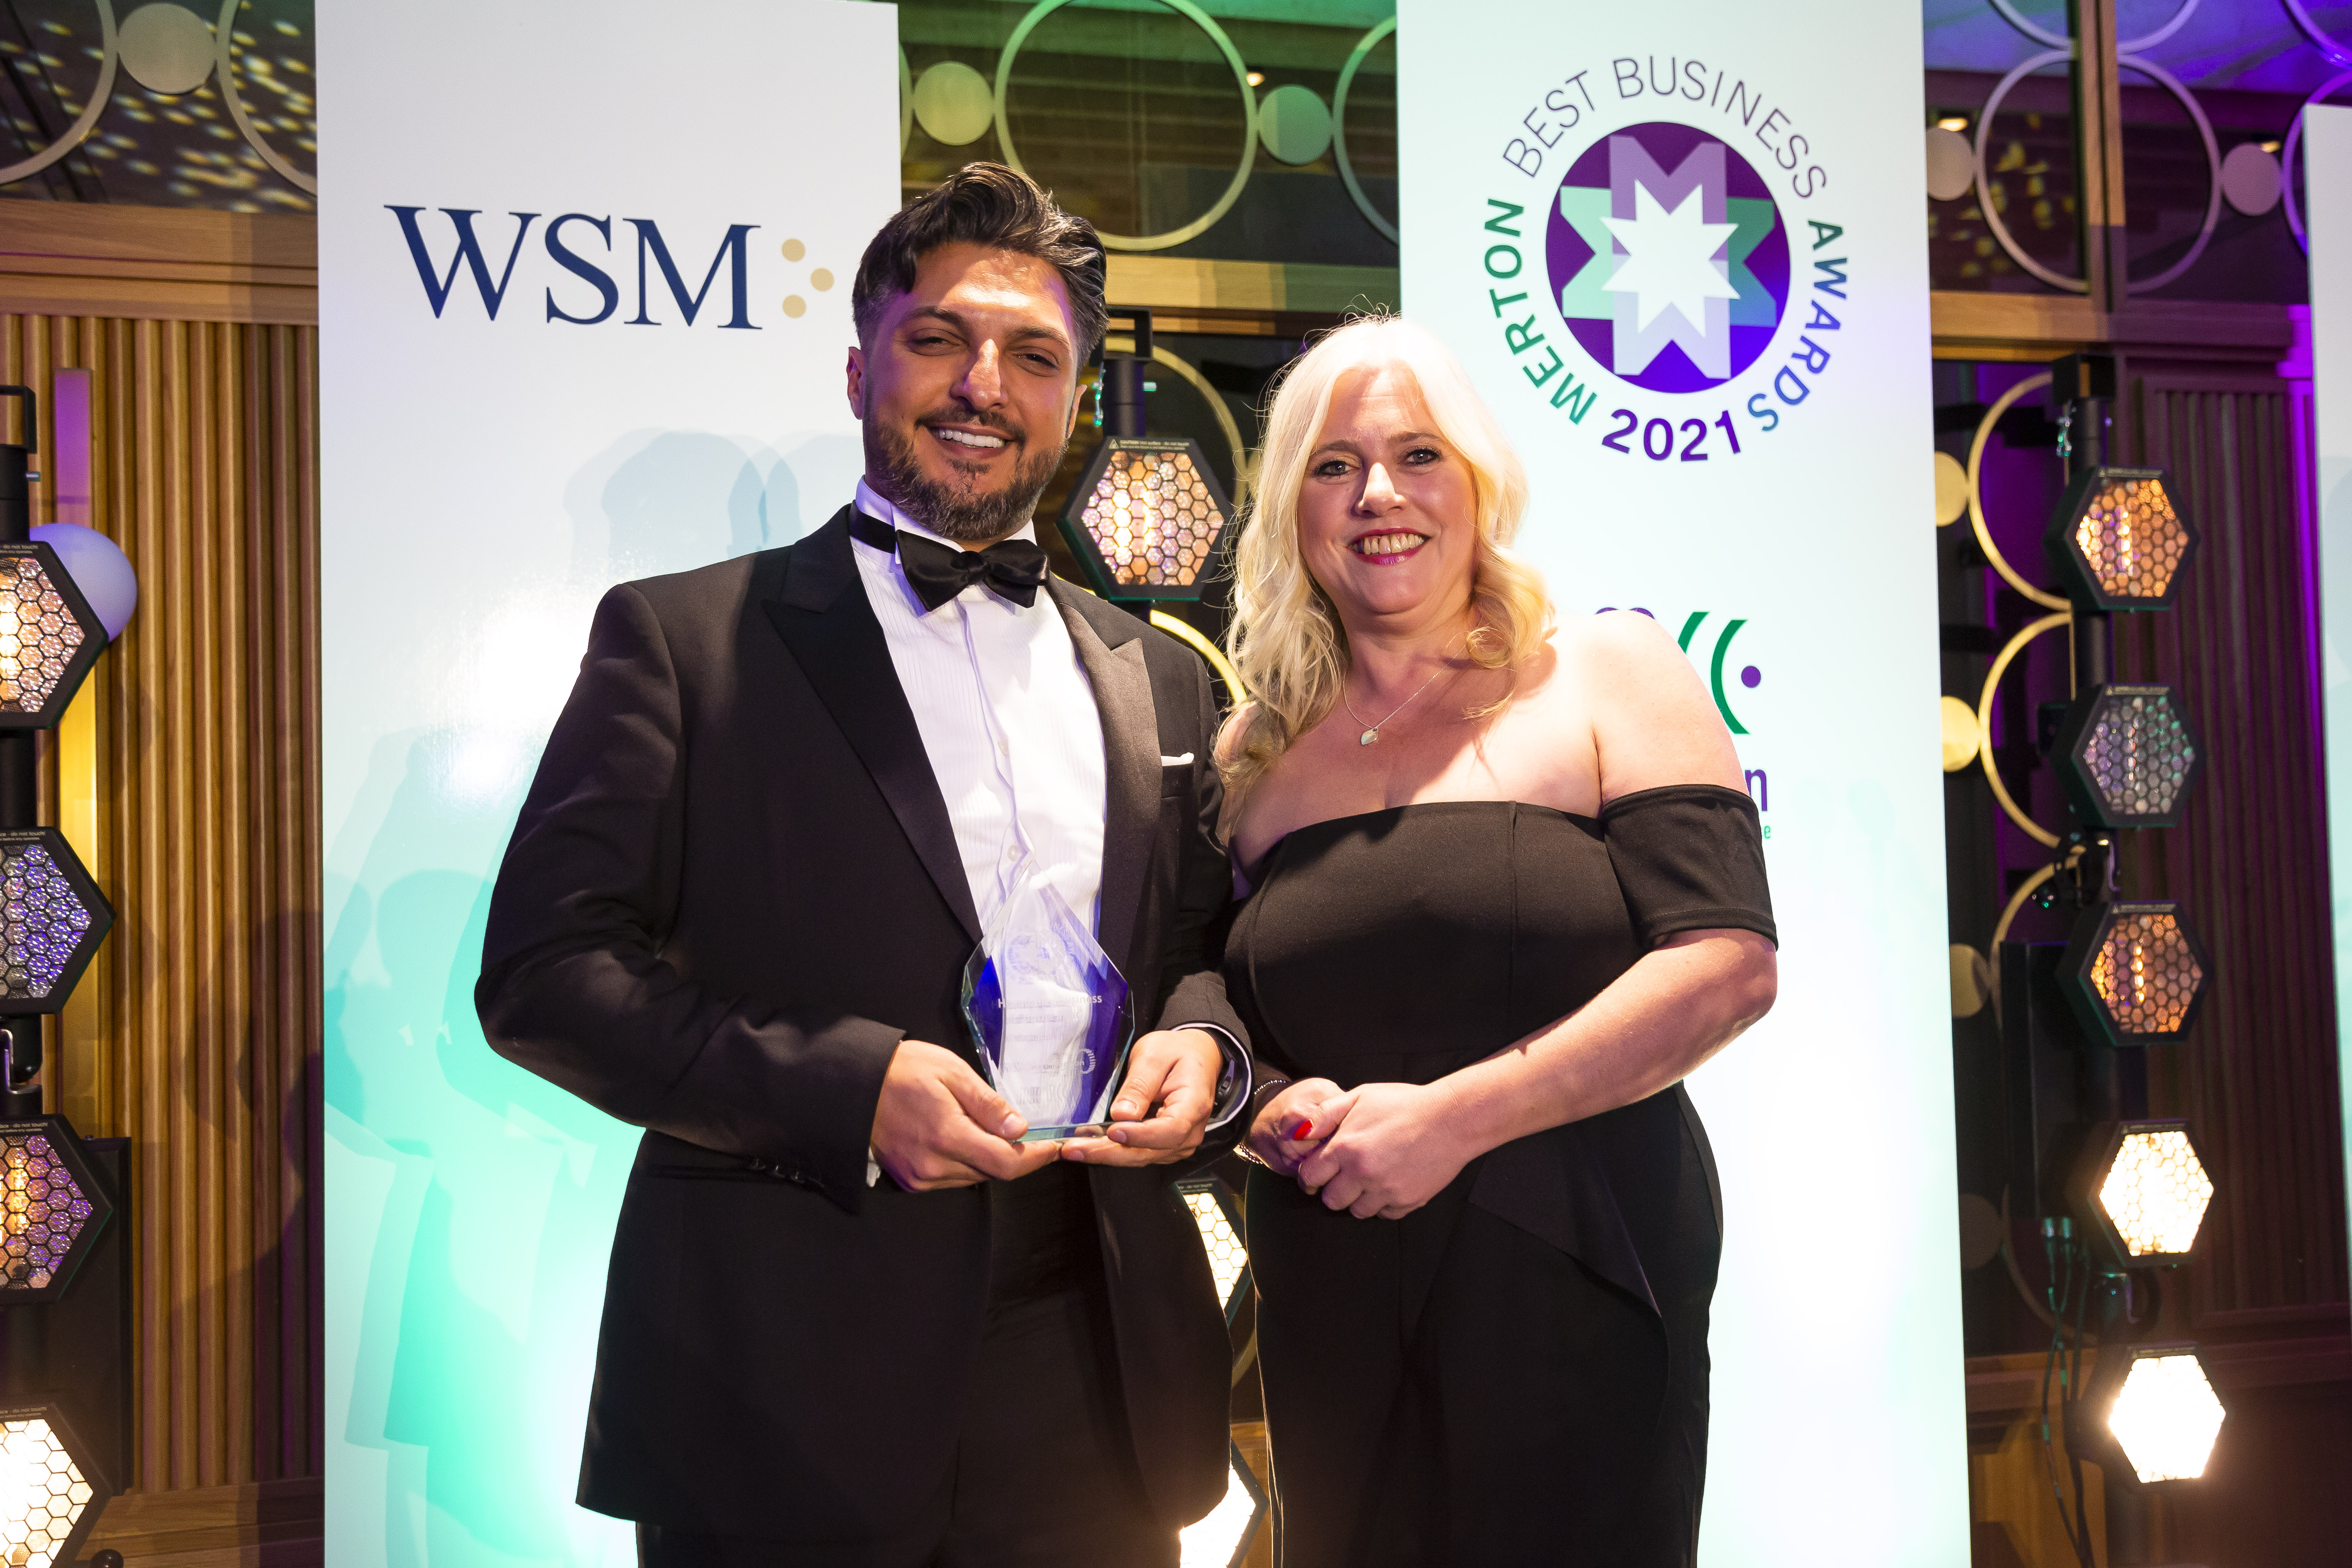 Congratulations to the winners of the Merton Best Business Awards 2021